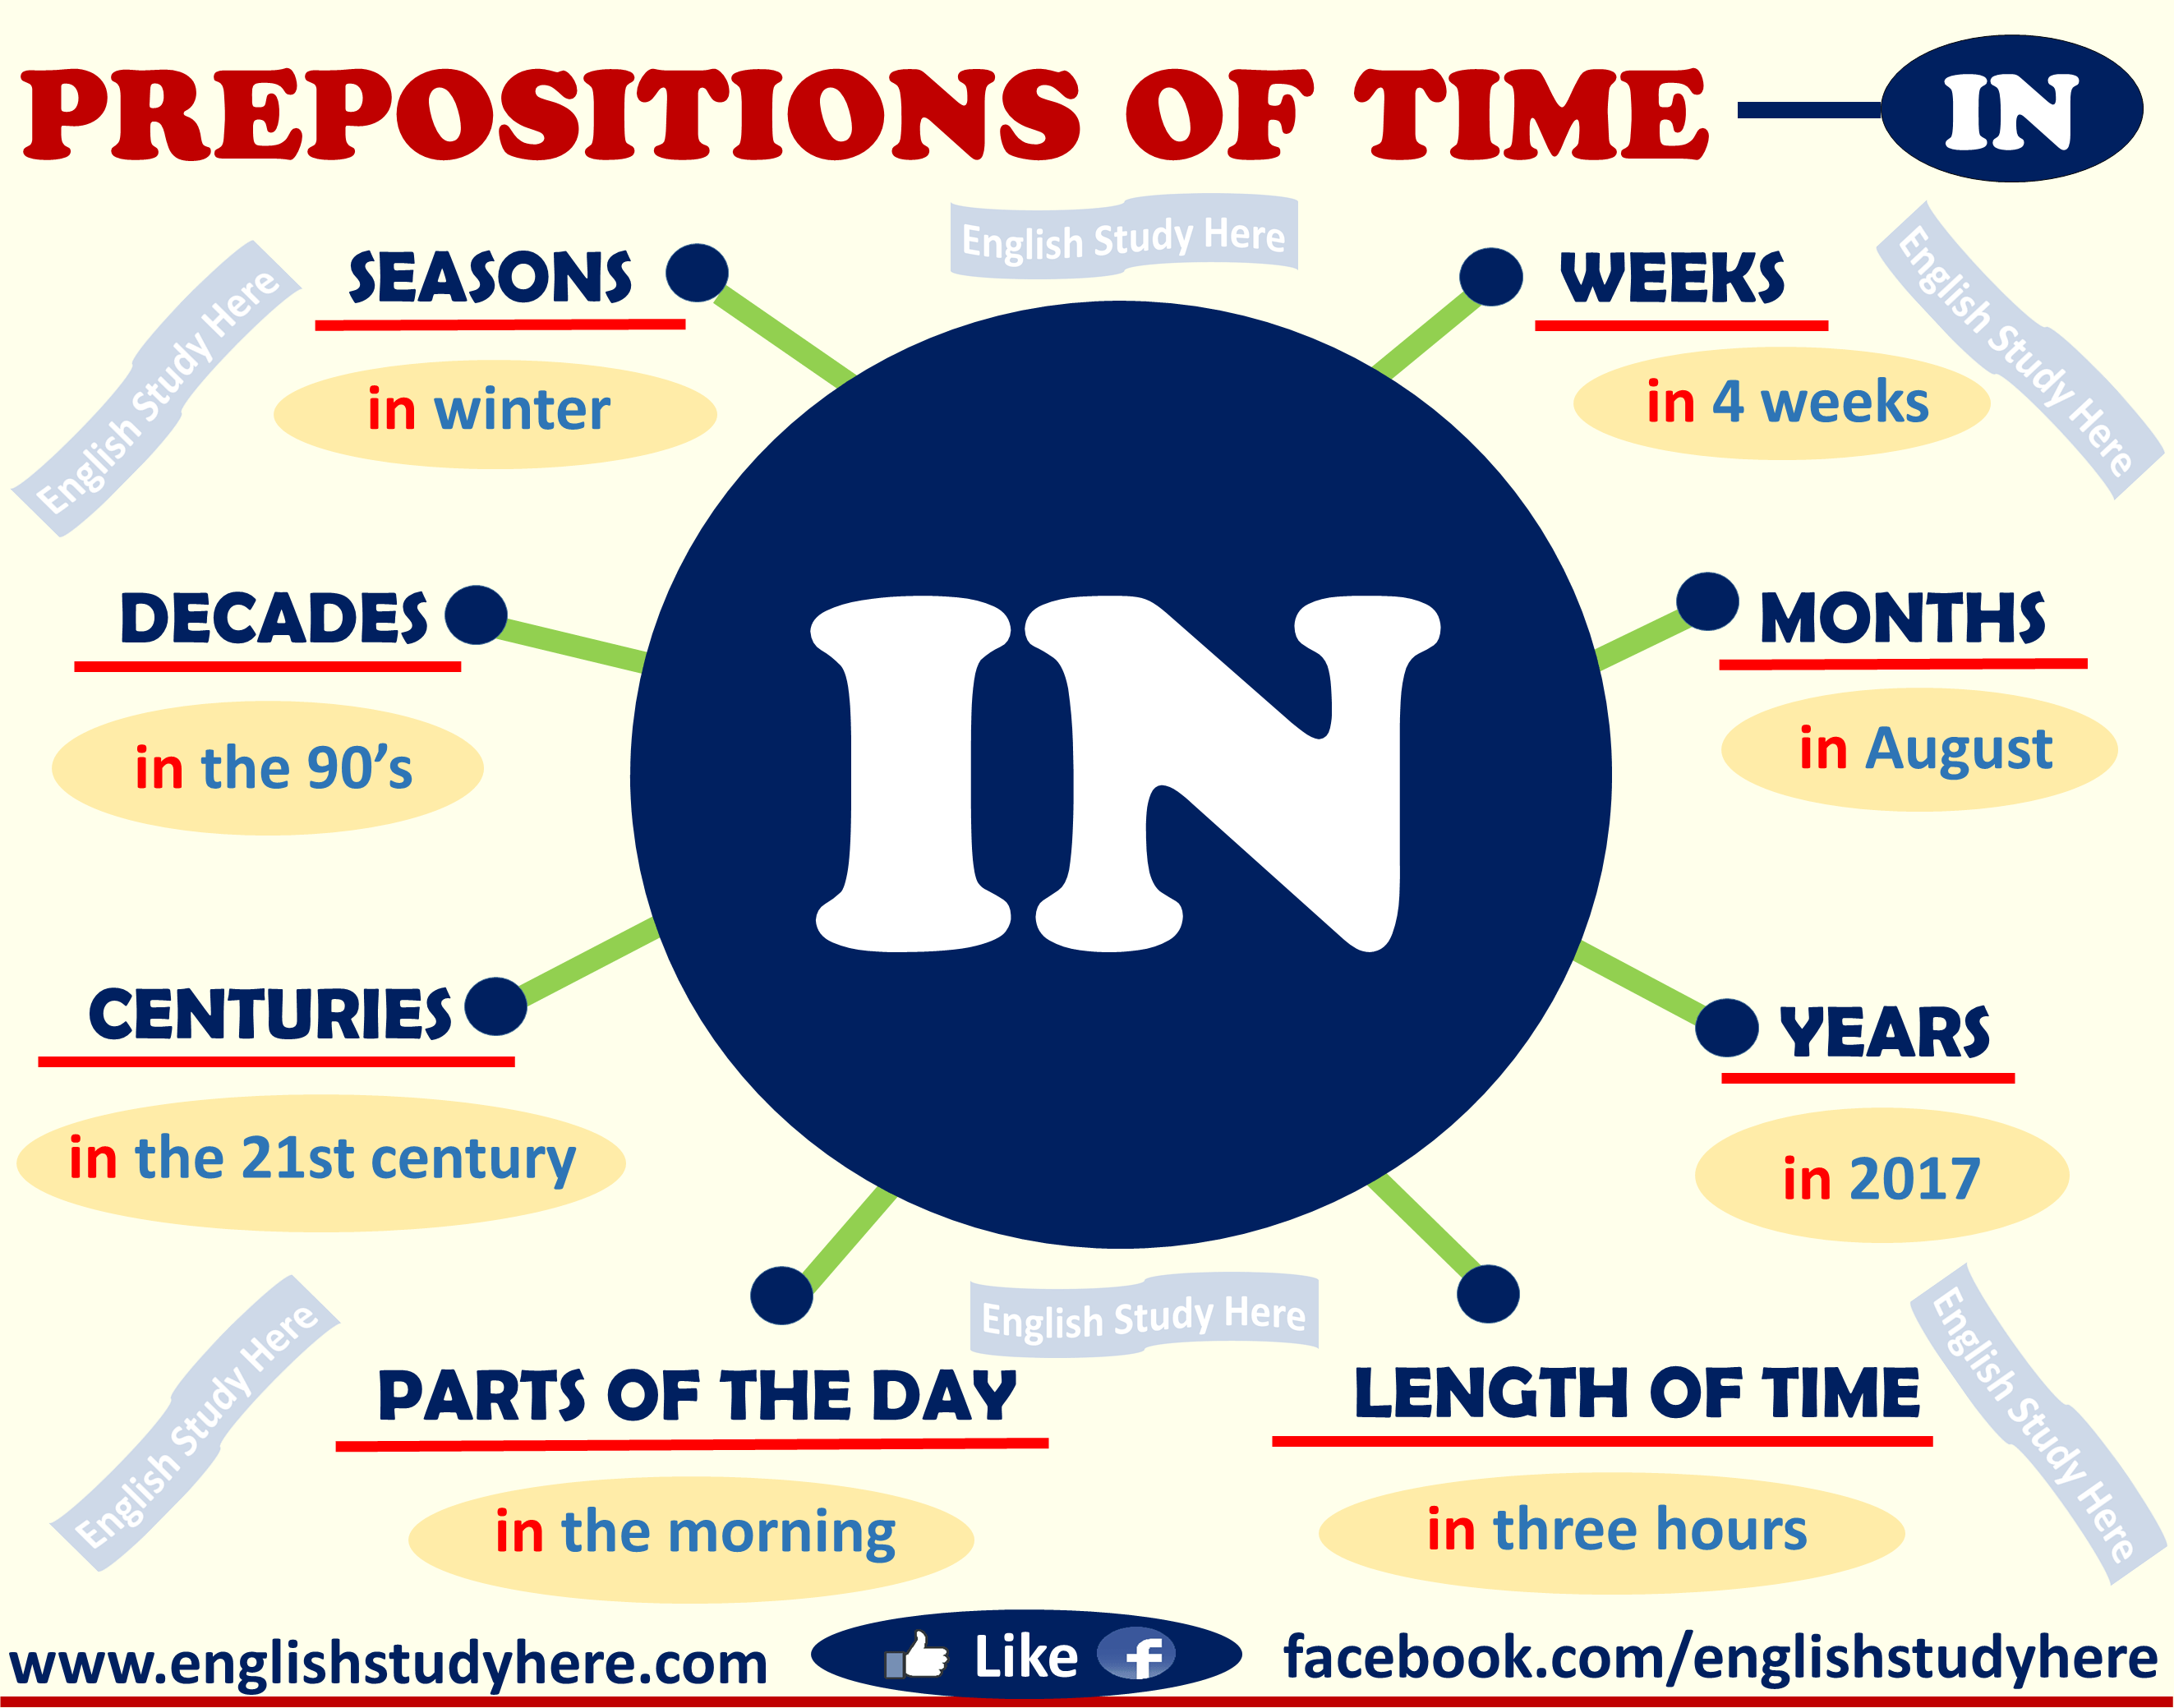 Prepositions Of Time In English Study Here